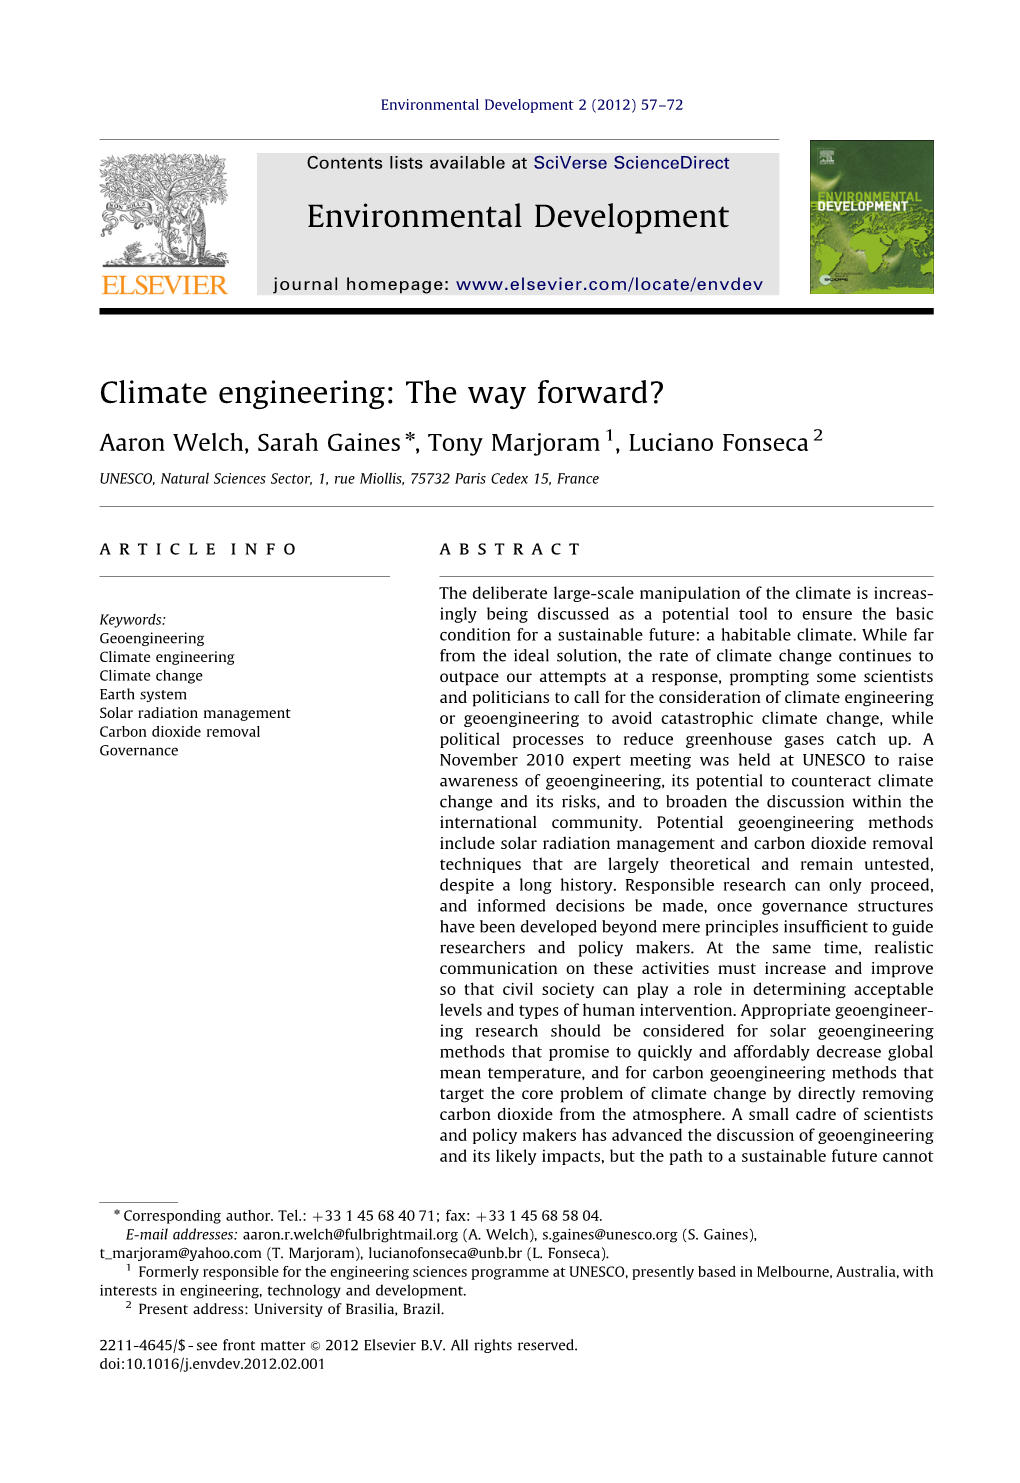 Climate Engineering the Way Forward?